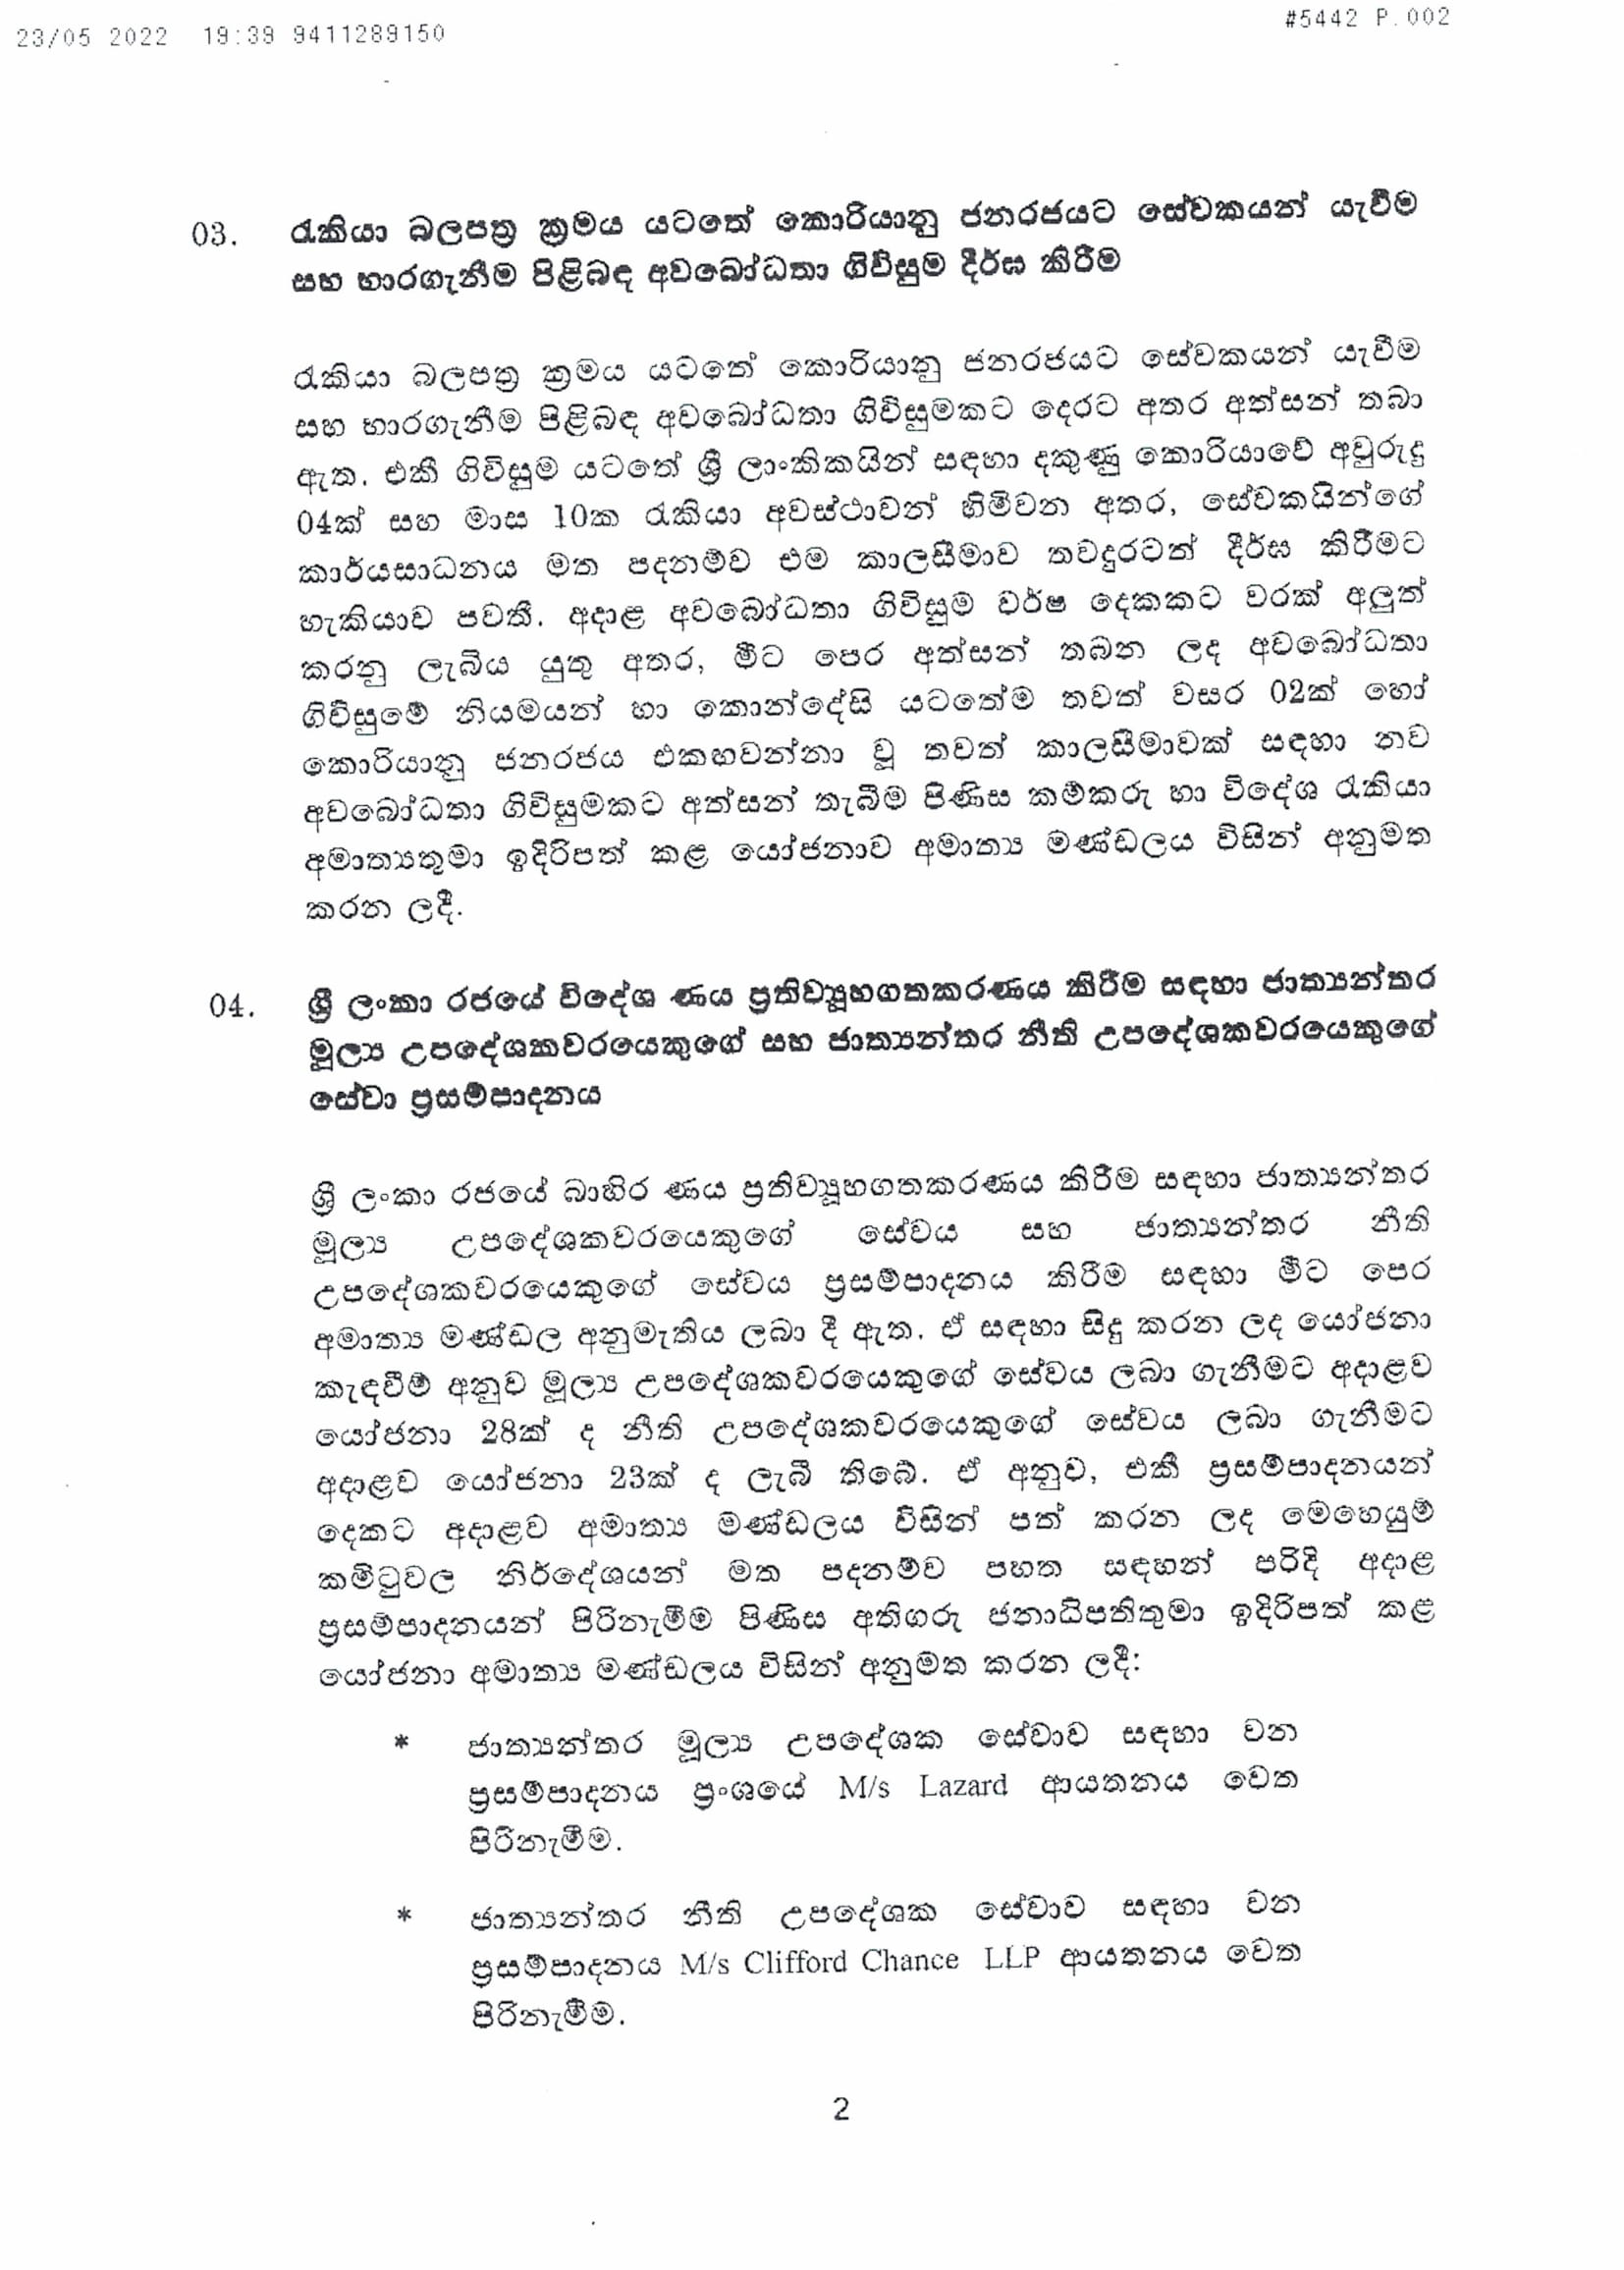 Cabinet Decision on 23.05.2022 2